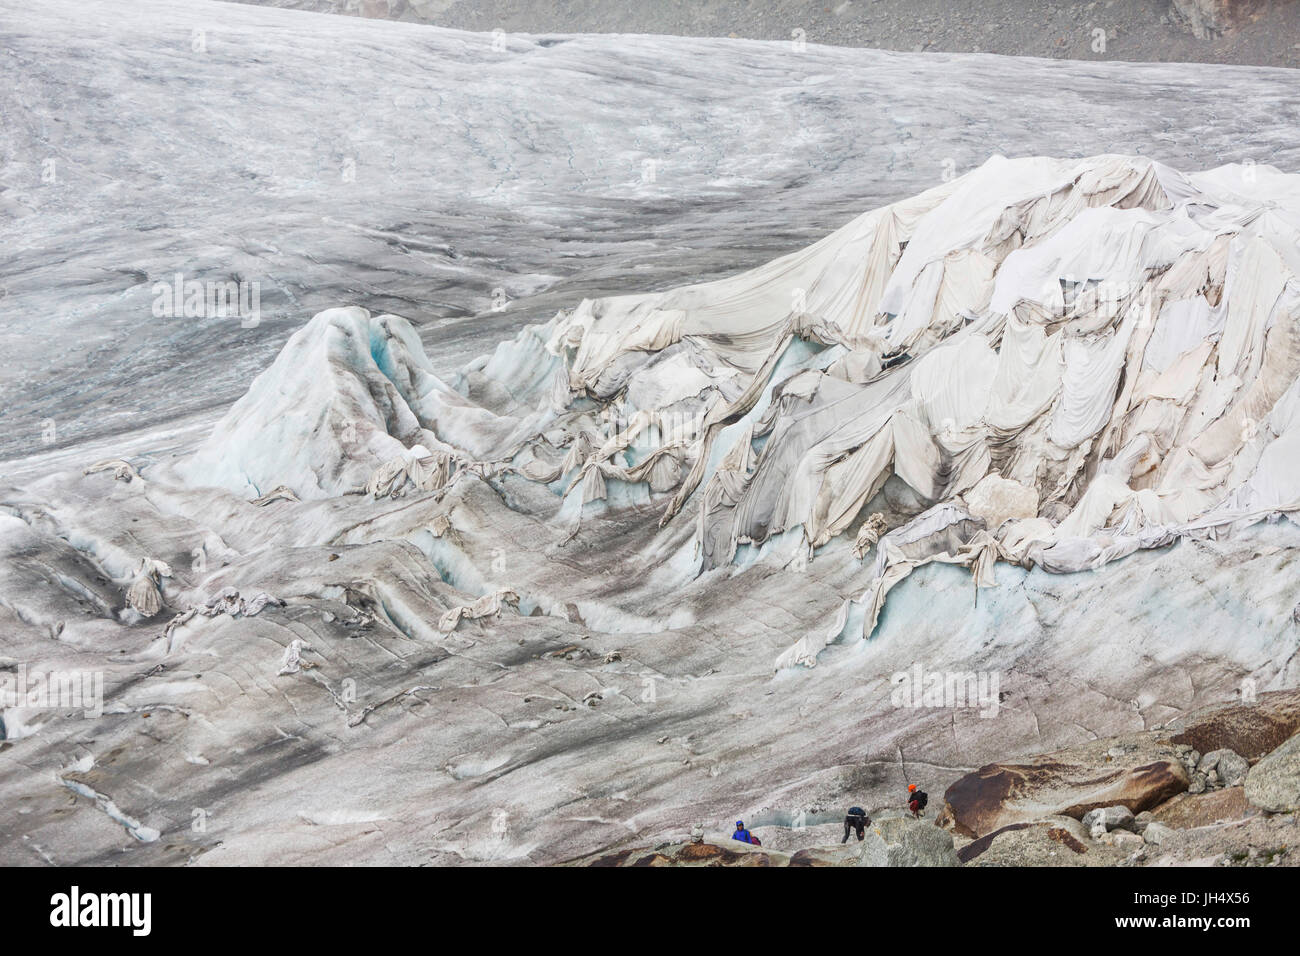 Glacier melt close up: The Rhone glacier is partially squeezed with cloths to slow the melting proc Stock Photo